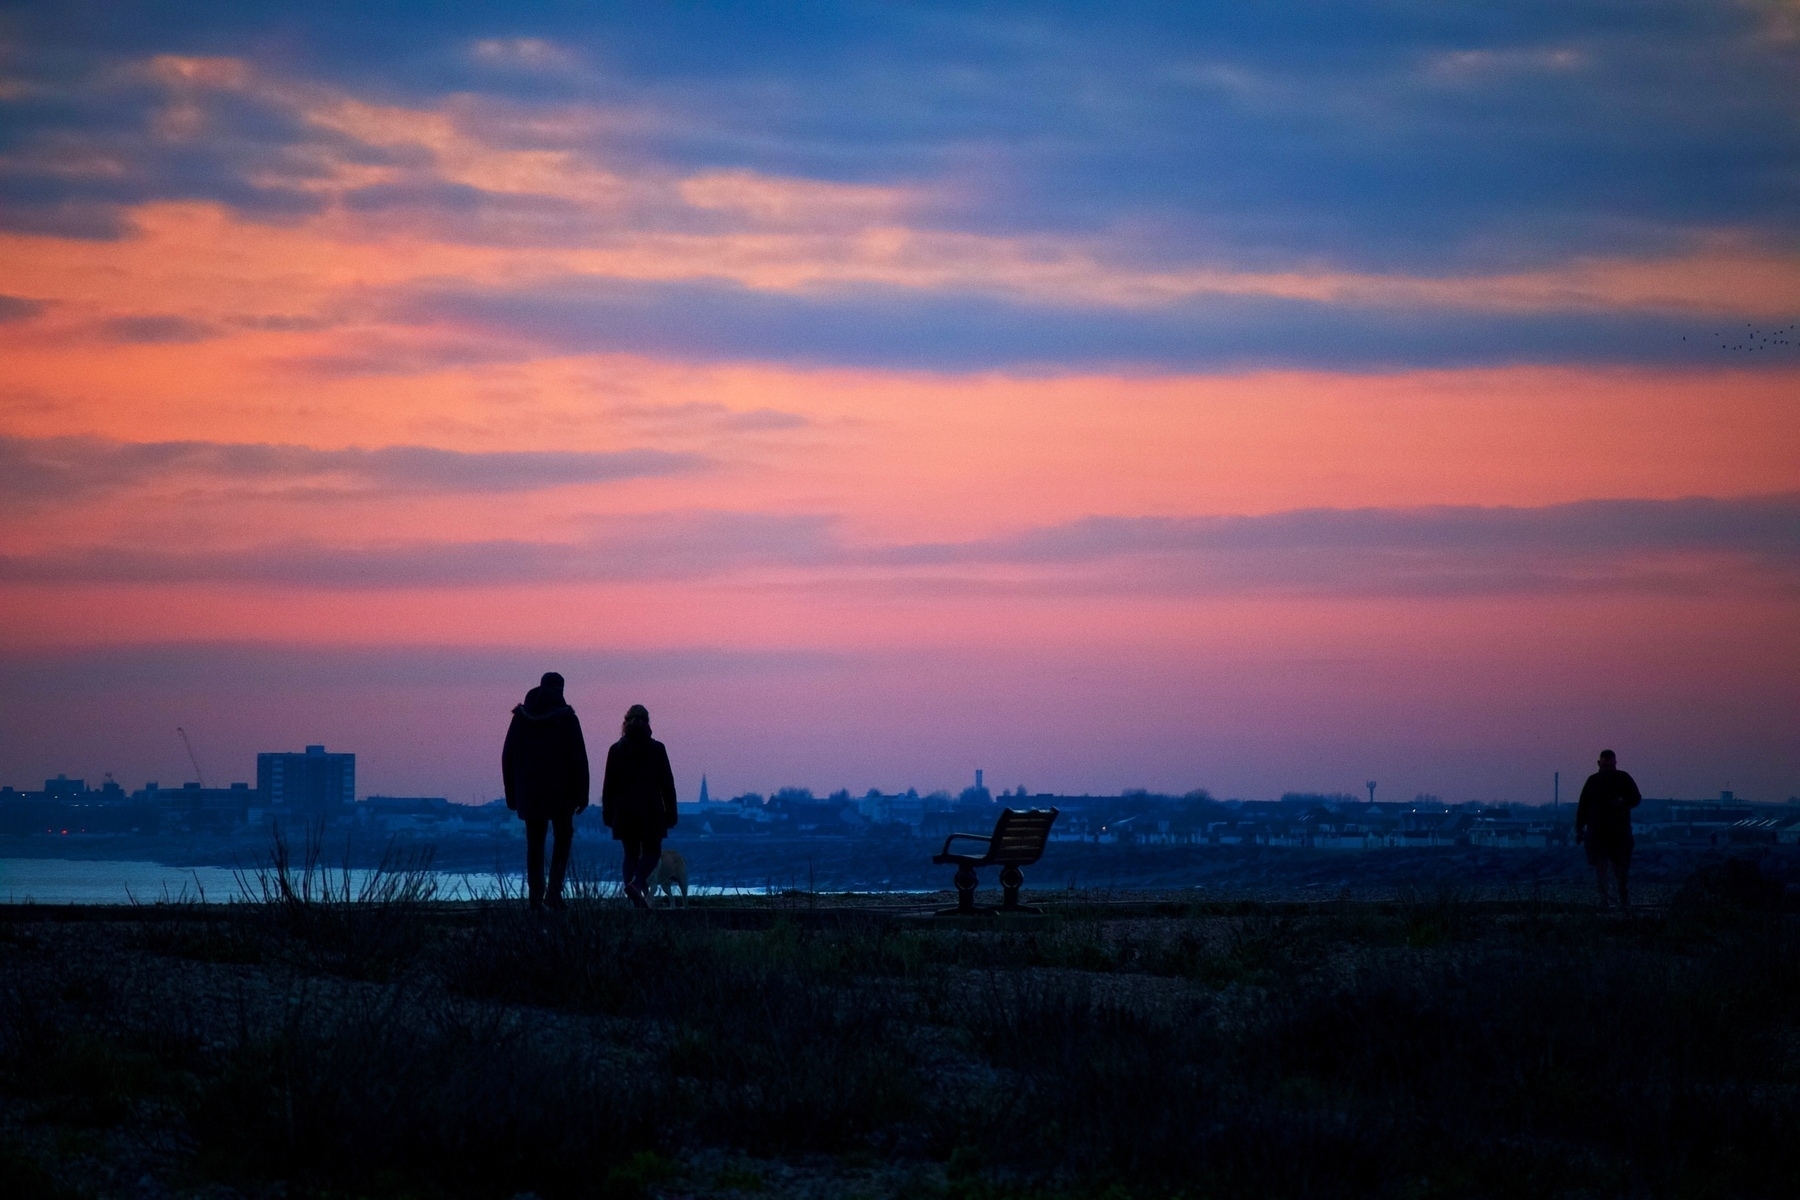 Dusk over Shoreham Beach, looking towards Worthing, with walkers in the foreground